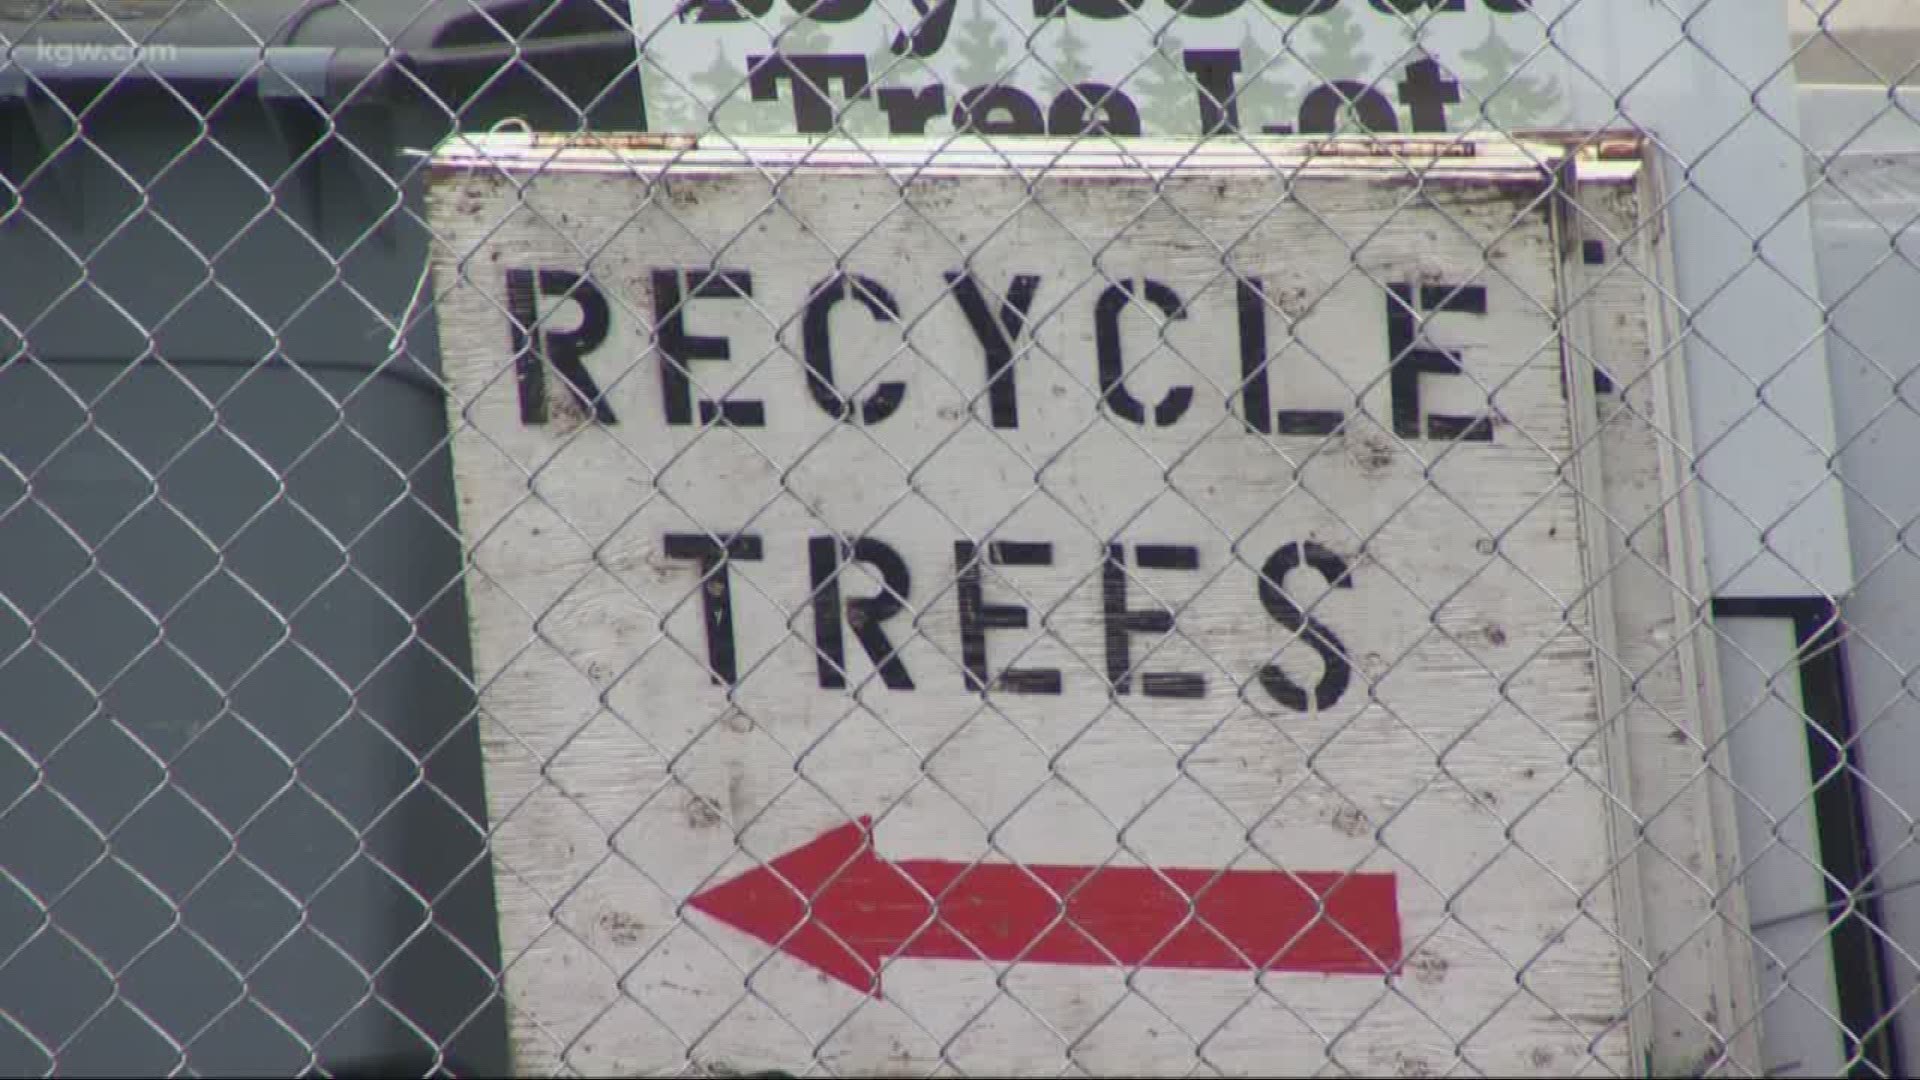 Here's where you can recycle your Christmas tree this year.